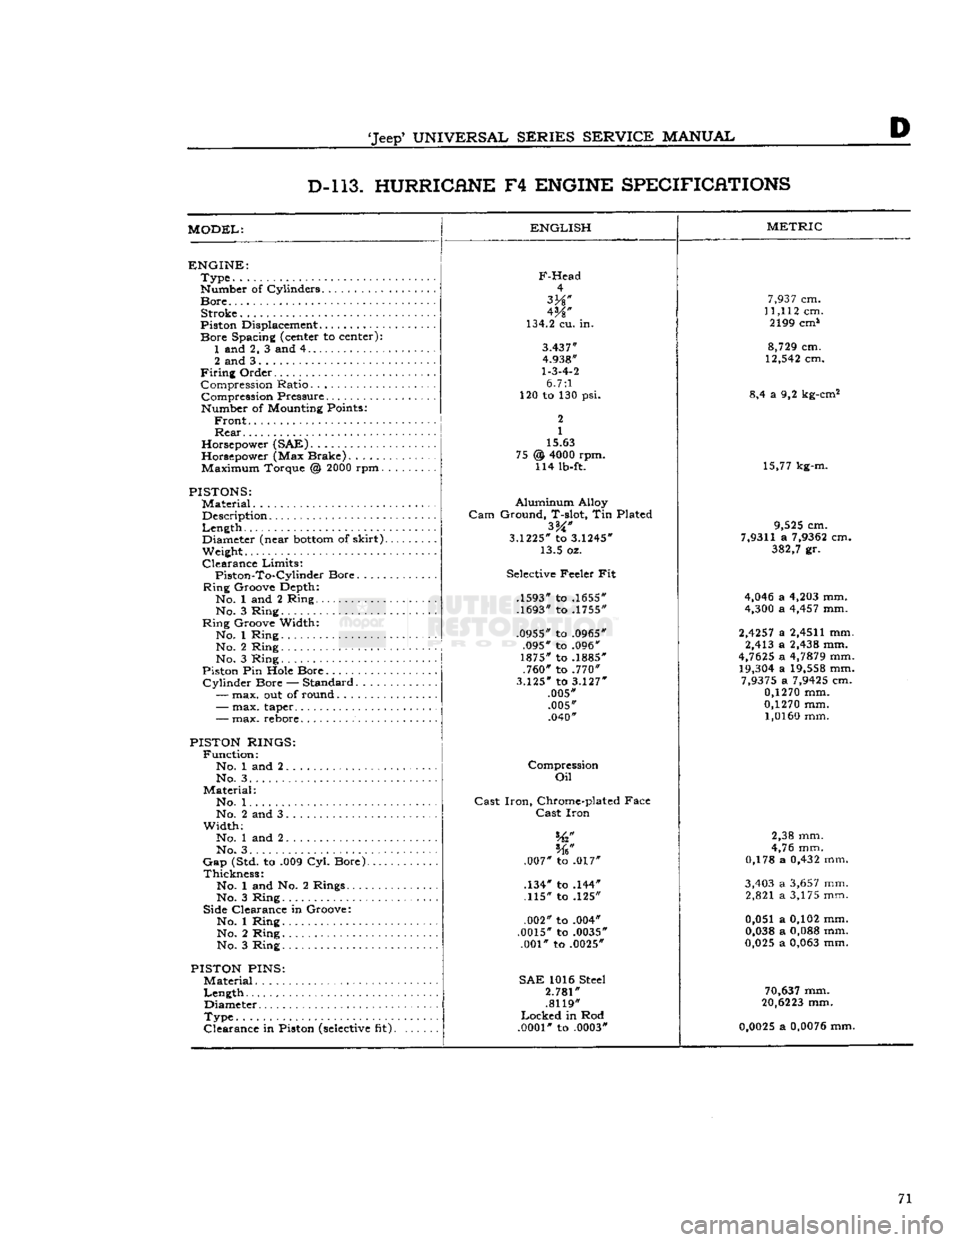 JEEP DJ 1953  Service Manual 
Jeep*
 UNIVERSAL
 SERIES
 SERVICE
 MANUAL 

D D-l 13. HURRICANE
 F4
 ENGINE SPECIFICATIONS 

MODEL: 
 ENGLISH 
ENGINE: 

Type 

Number of Cylinders 

Bore 
 Stroke 
Piston Displacement........... 
 